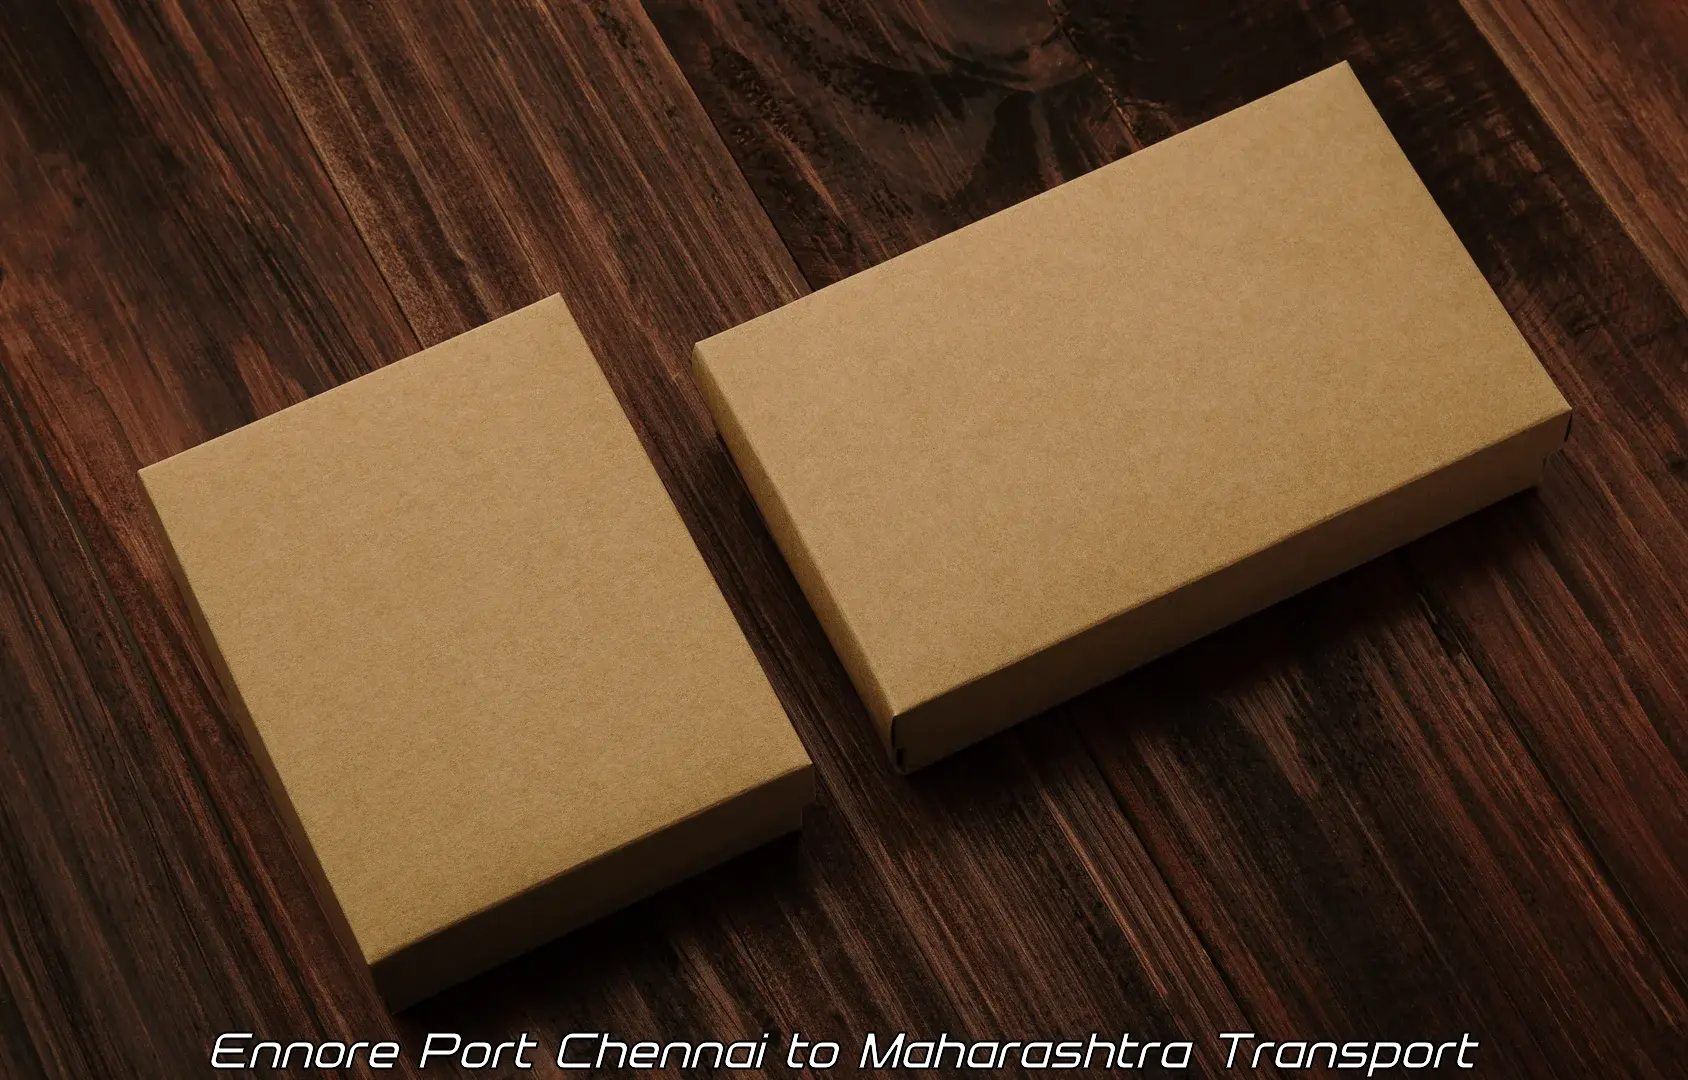 Part load transport service in India Ennore Port Chennai to Akkalkot